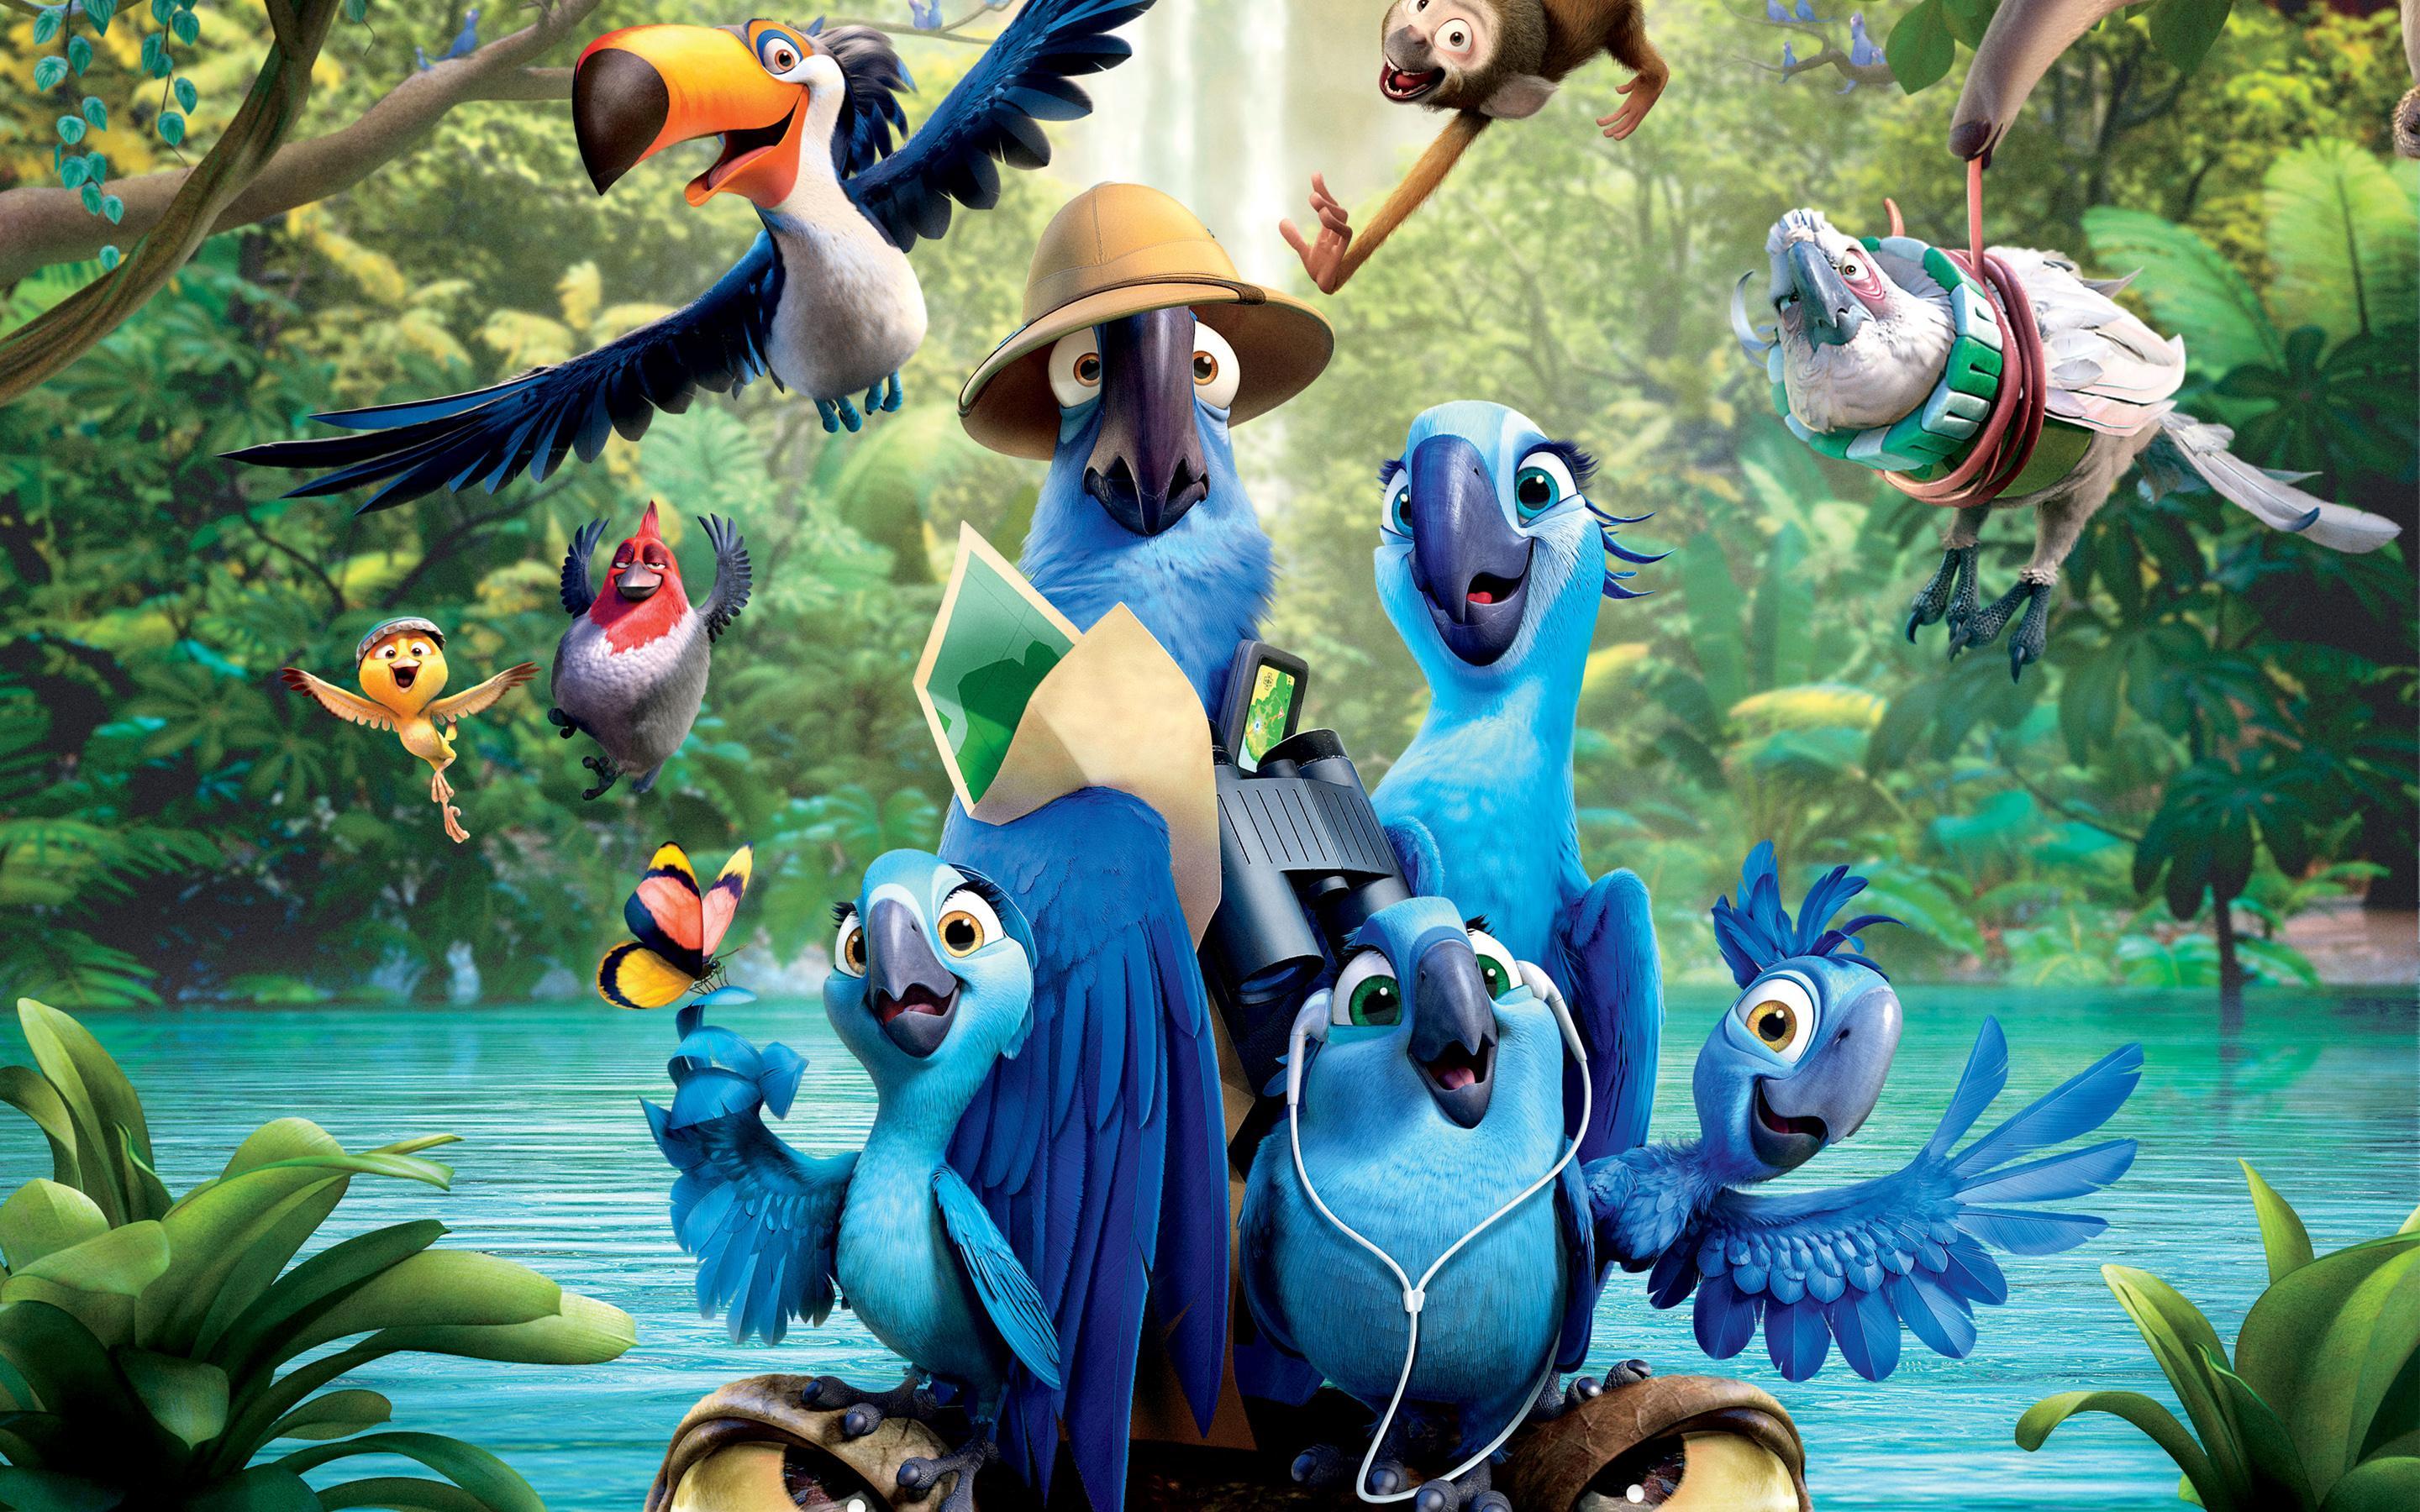 General 2880x1800 action figures Rio (movie) Rio 2 movies movie characters digital art